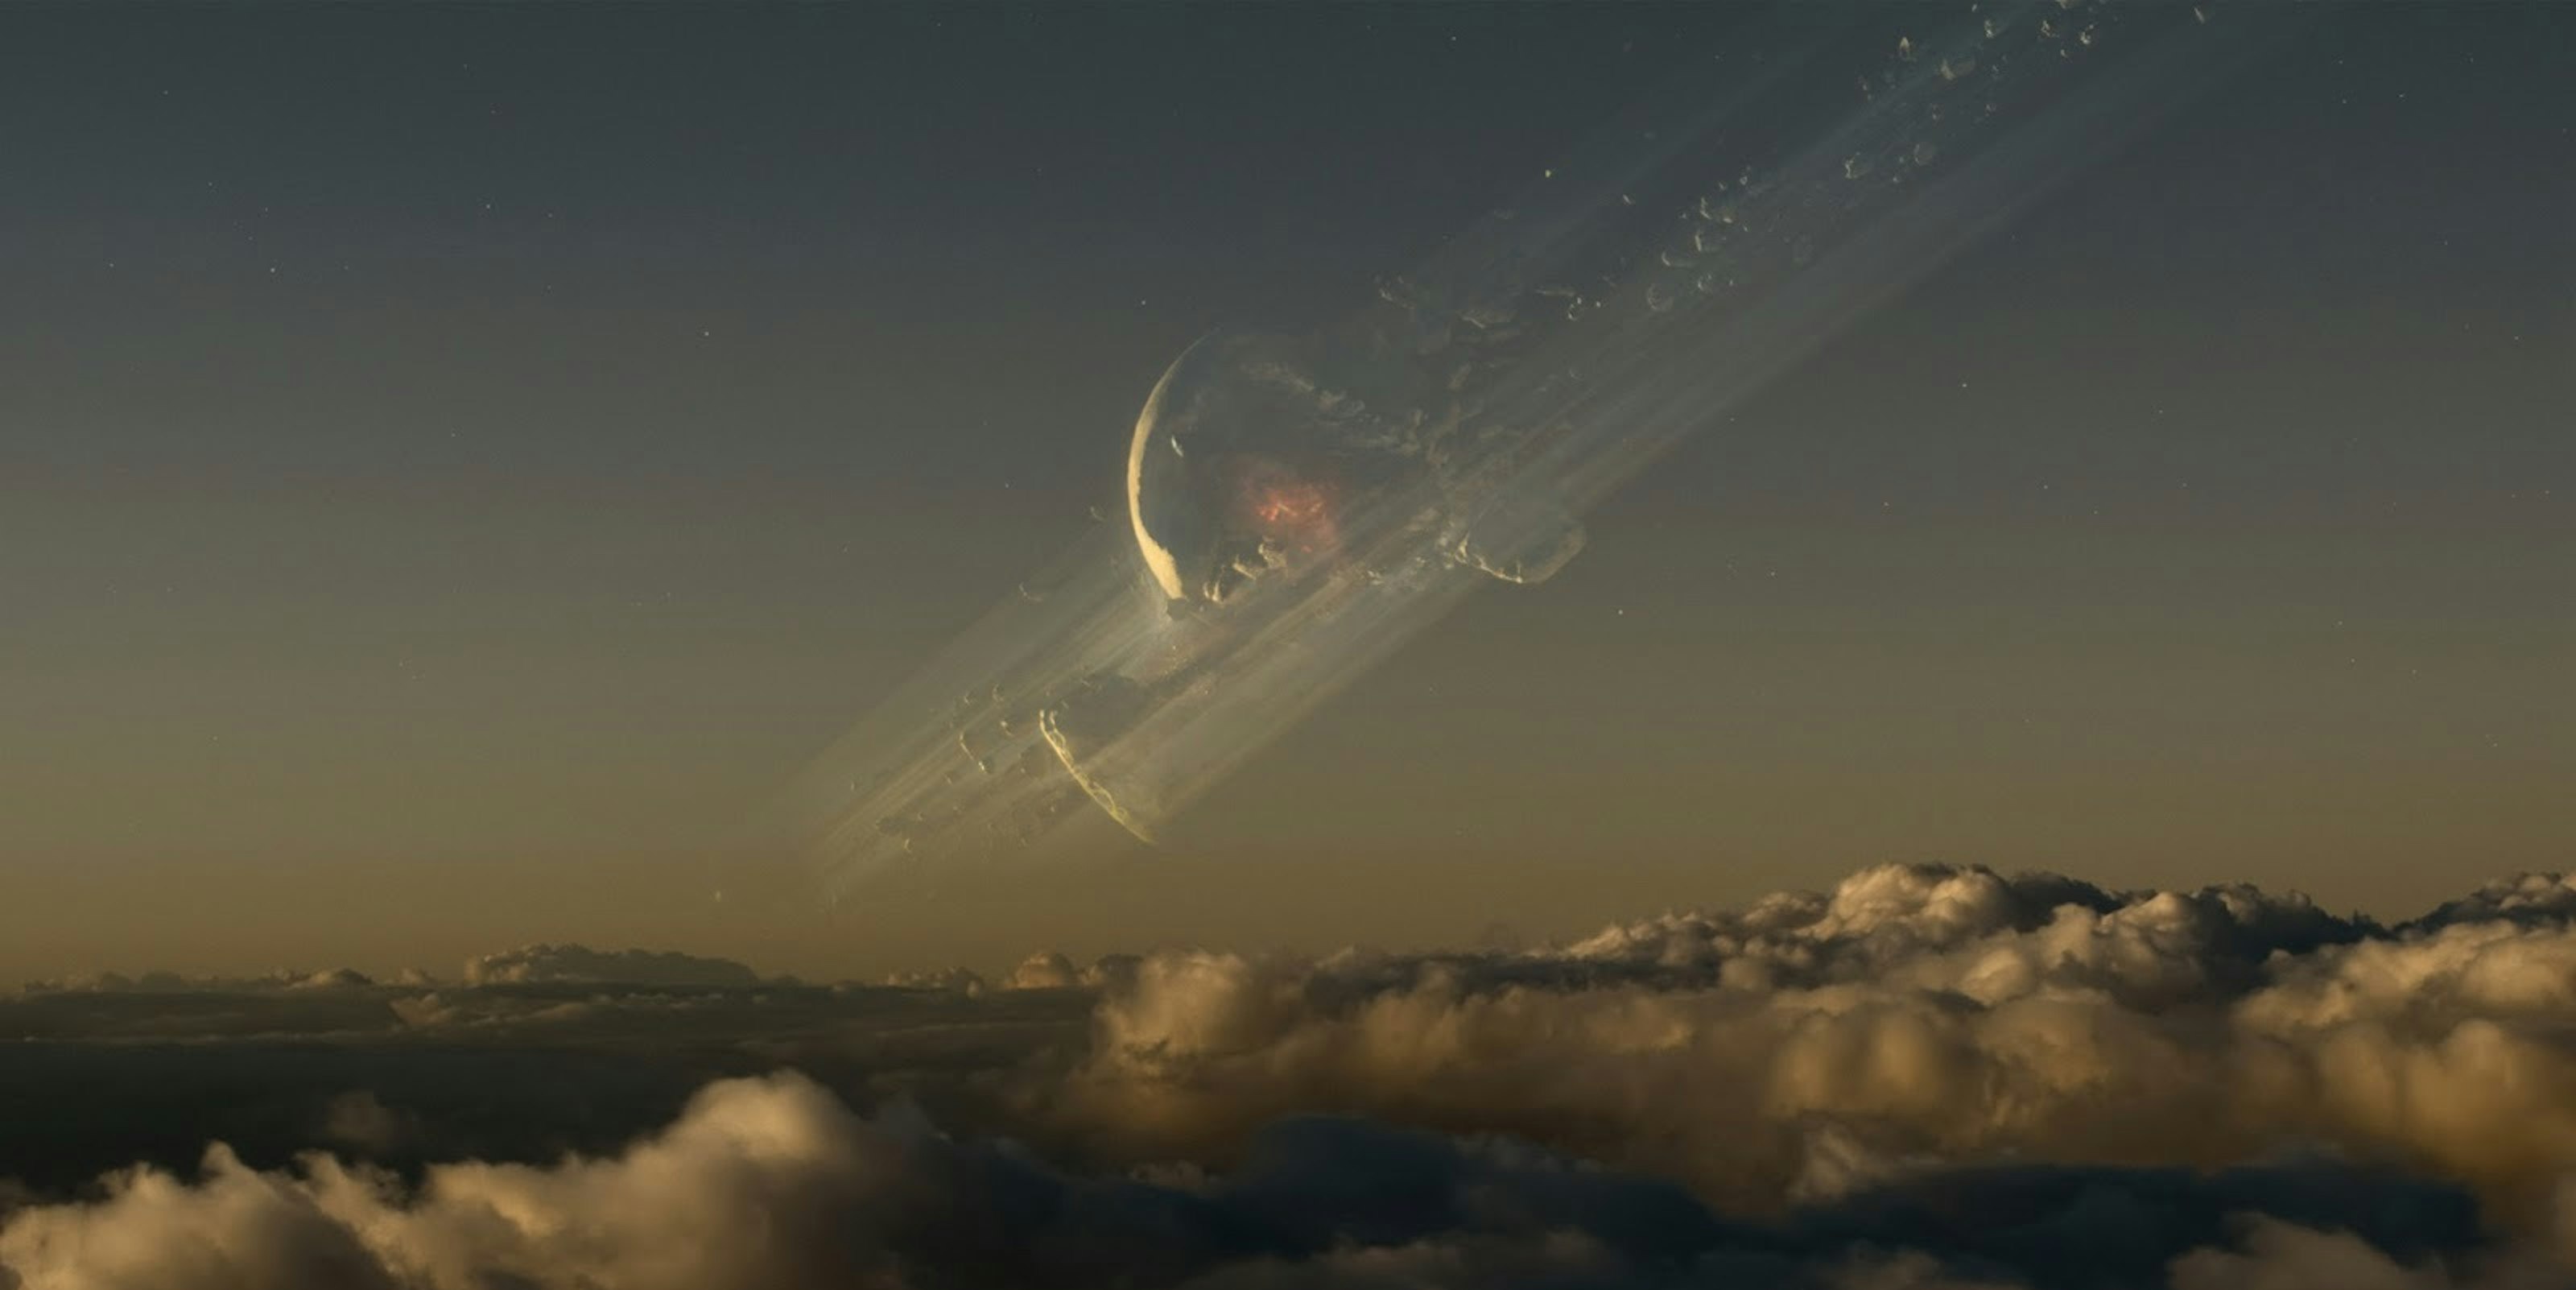 A still from the movie “Oblivion,” depicting a shattered moon.